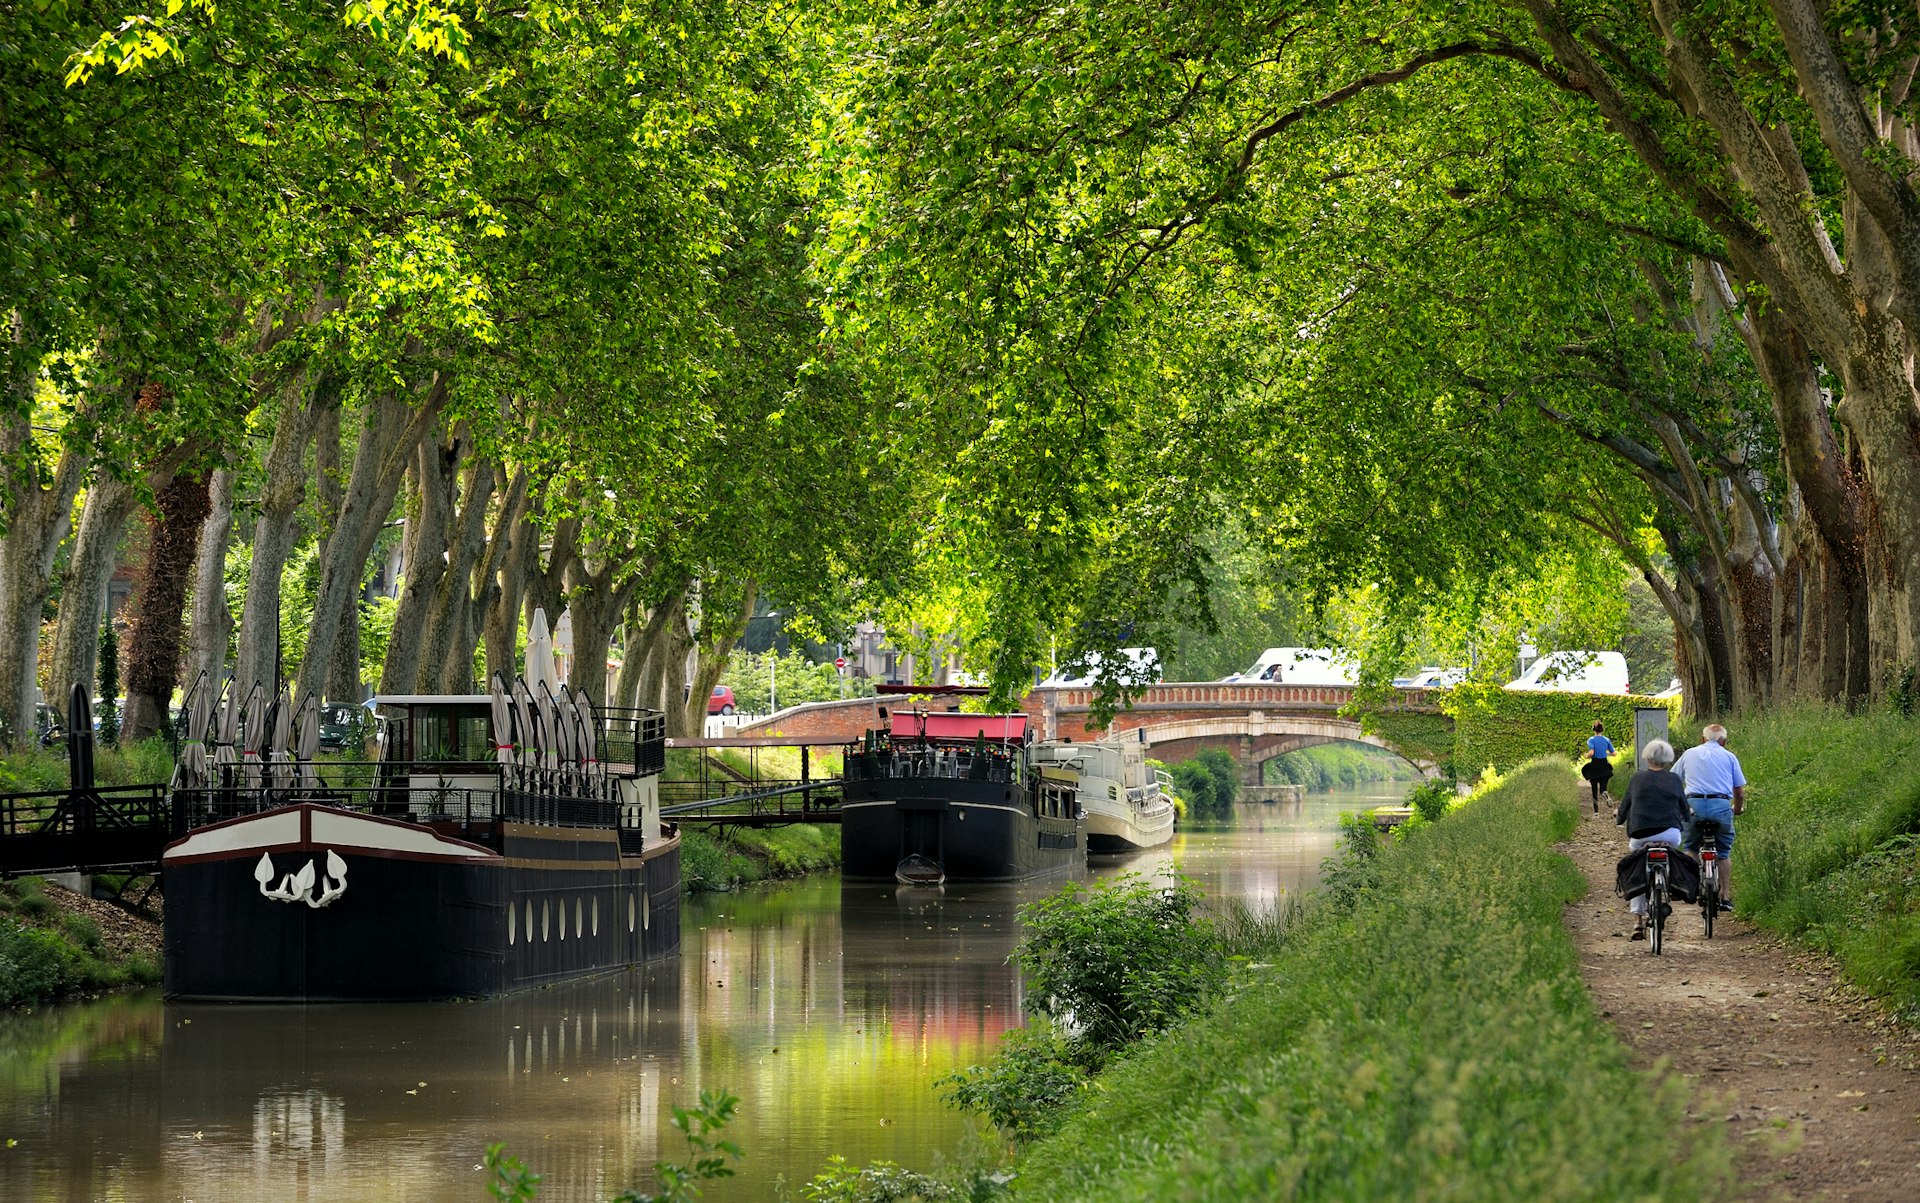 People cycle and walk along a canal tow path, with several boats and a lot of greenery